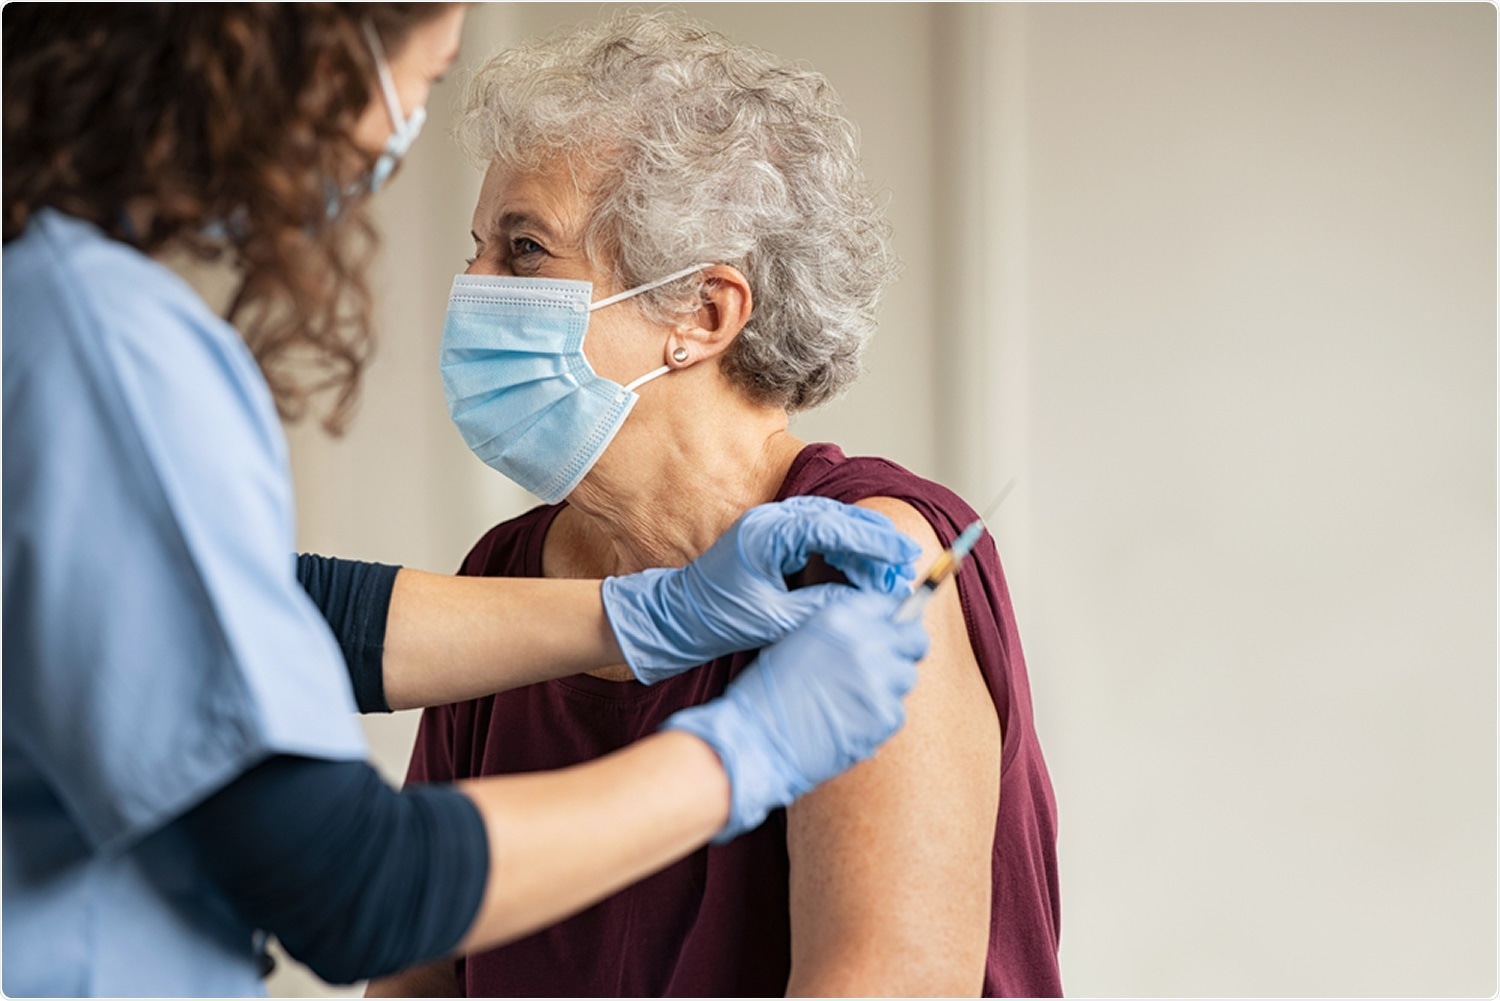 Study: mRNA vaccine effectiveness against COVID-19-related hospitalisations and deaths in older adults: a cohort study based on data linkage of national health registries in Portugal, February to August 2021. Image Credit: Rido / Shutterstock